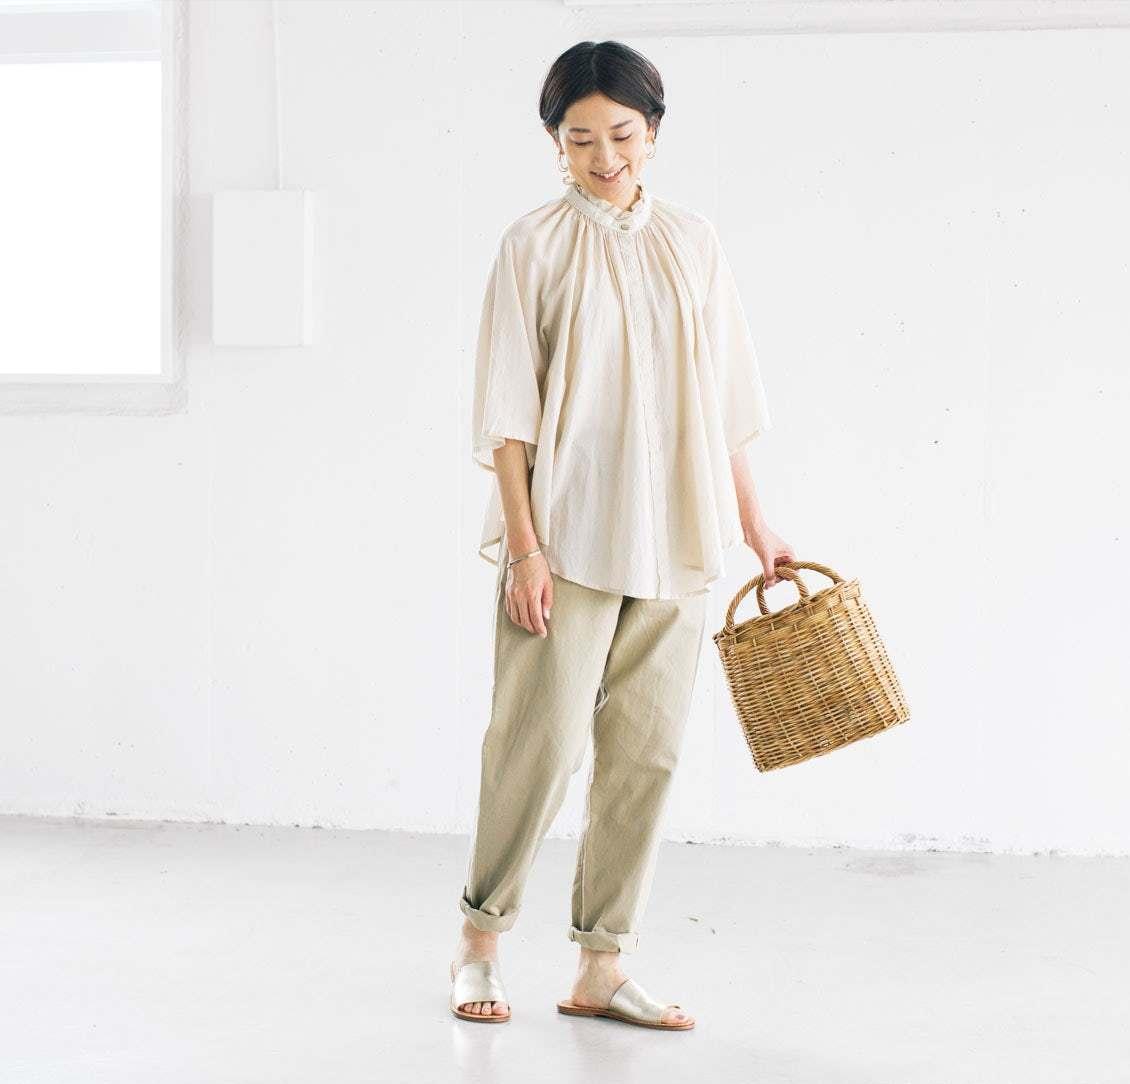 The 50-year-old Japanese housewife's early summer dress, older women ...